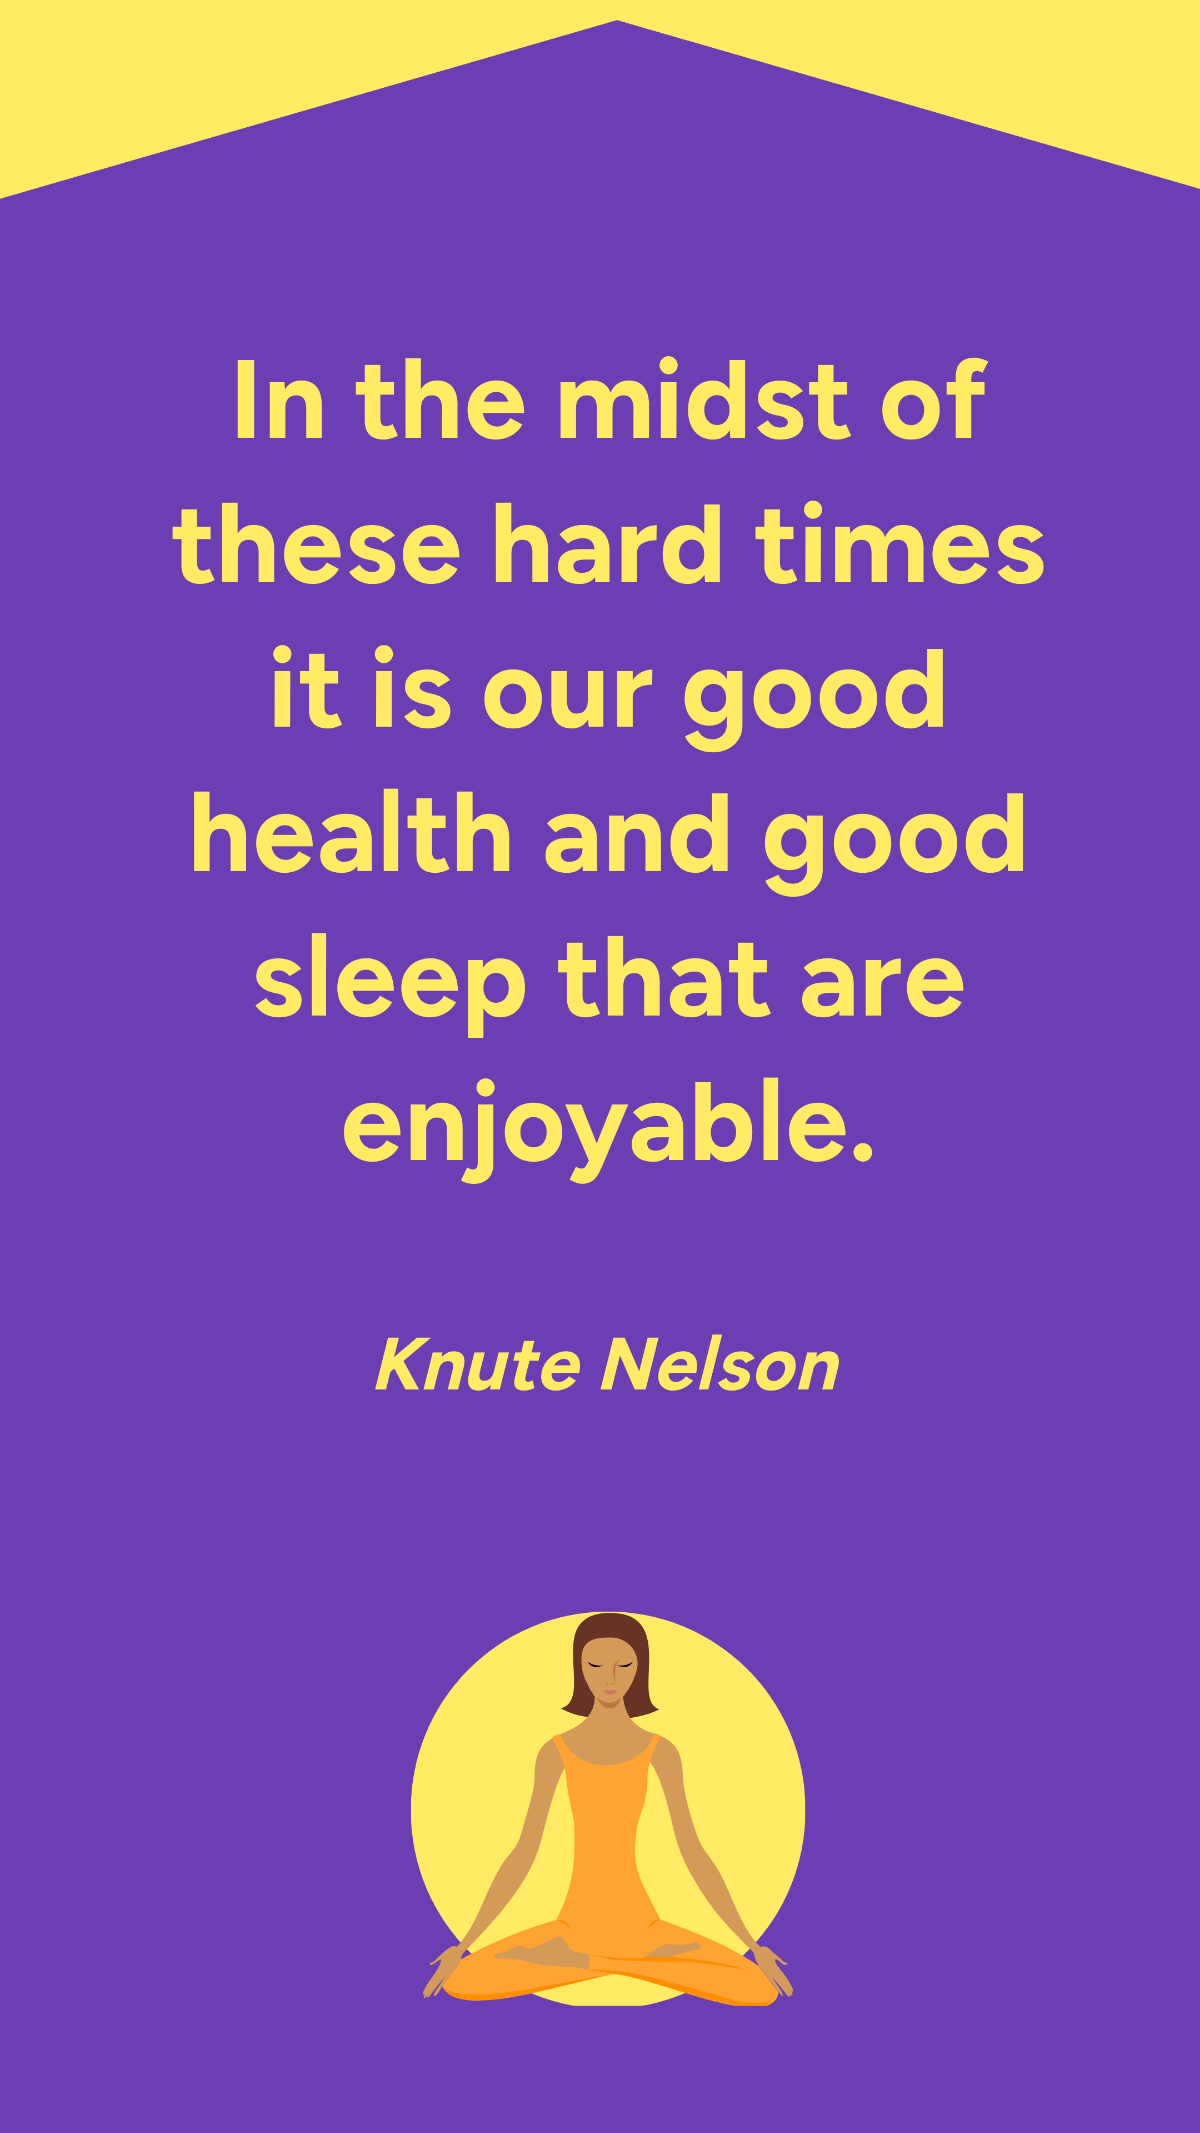 Free Knute Nelson - In the midst of these hard times it is our good health and good sleep that are enjoyable. Template